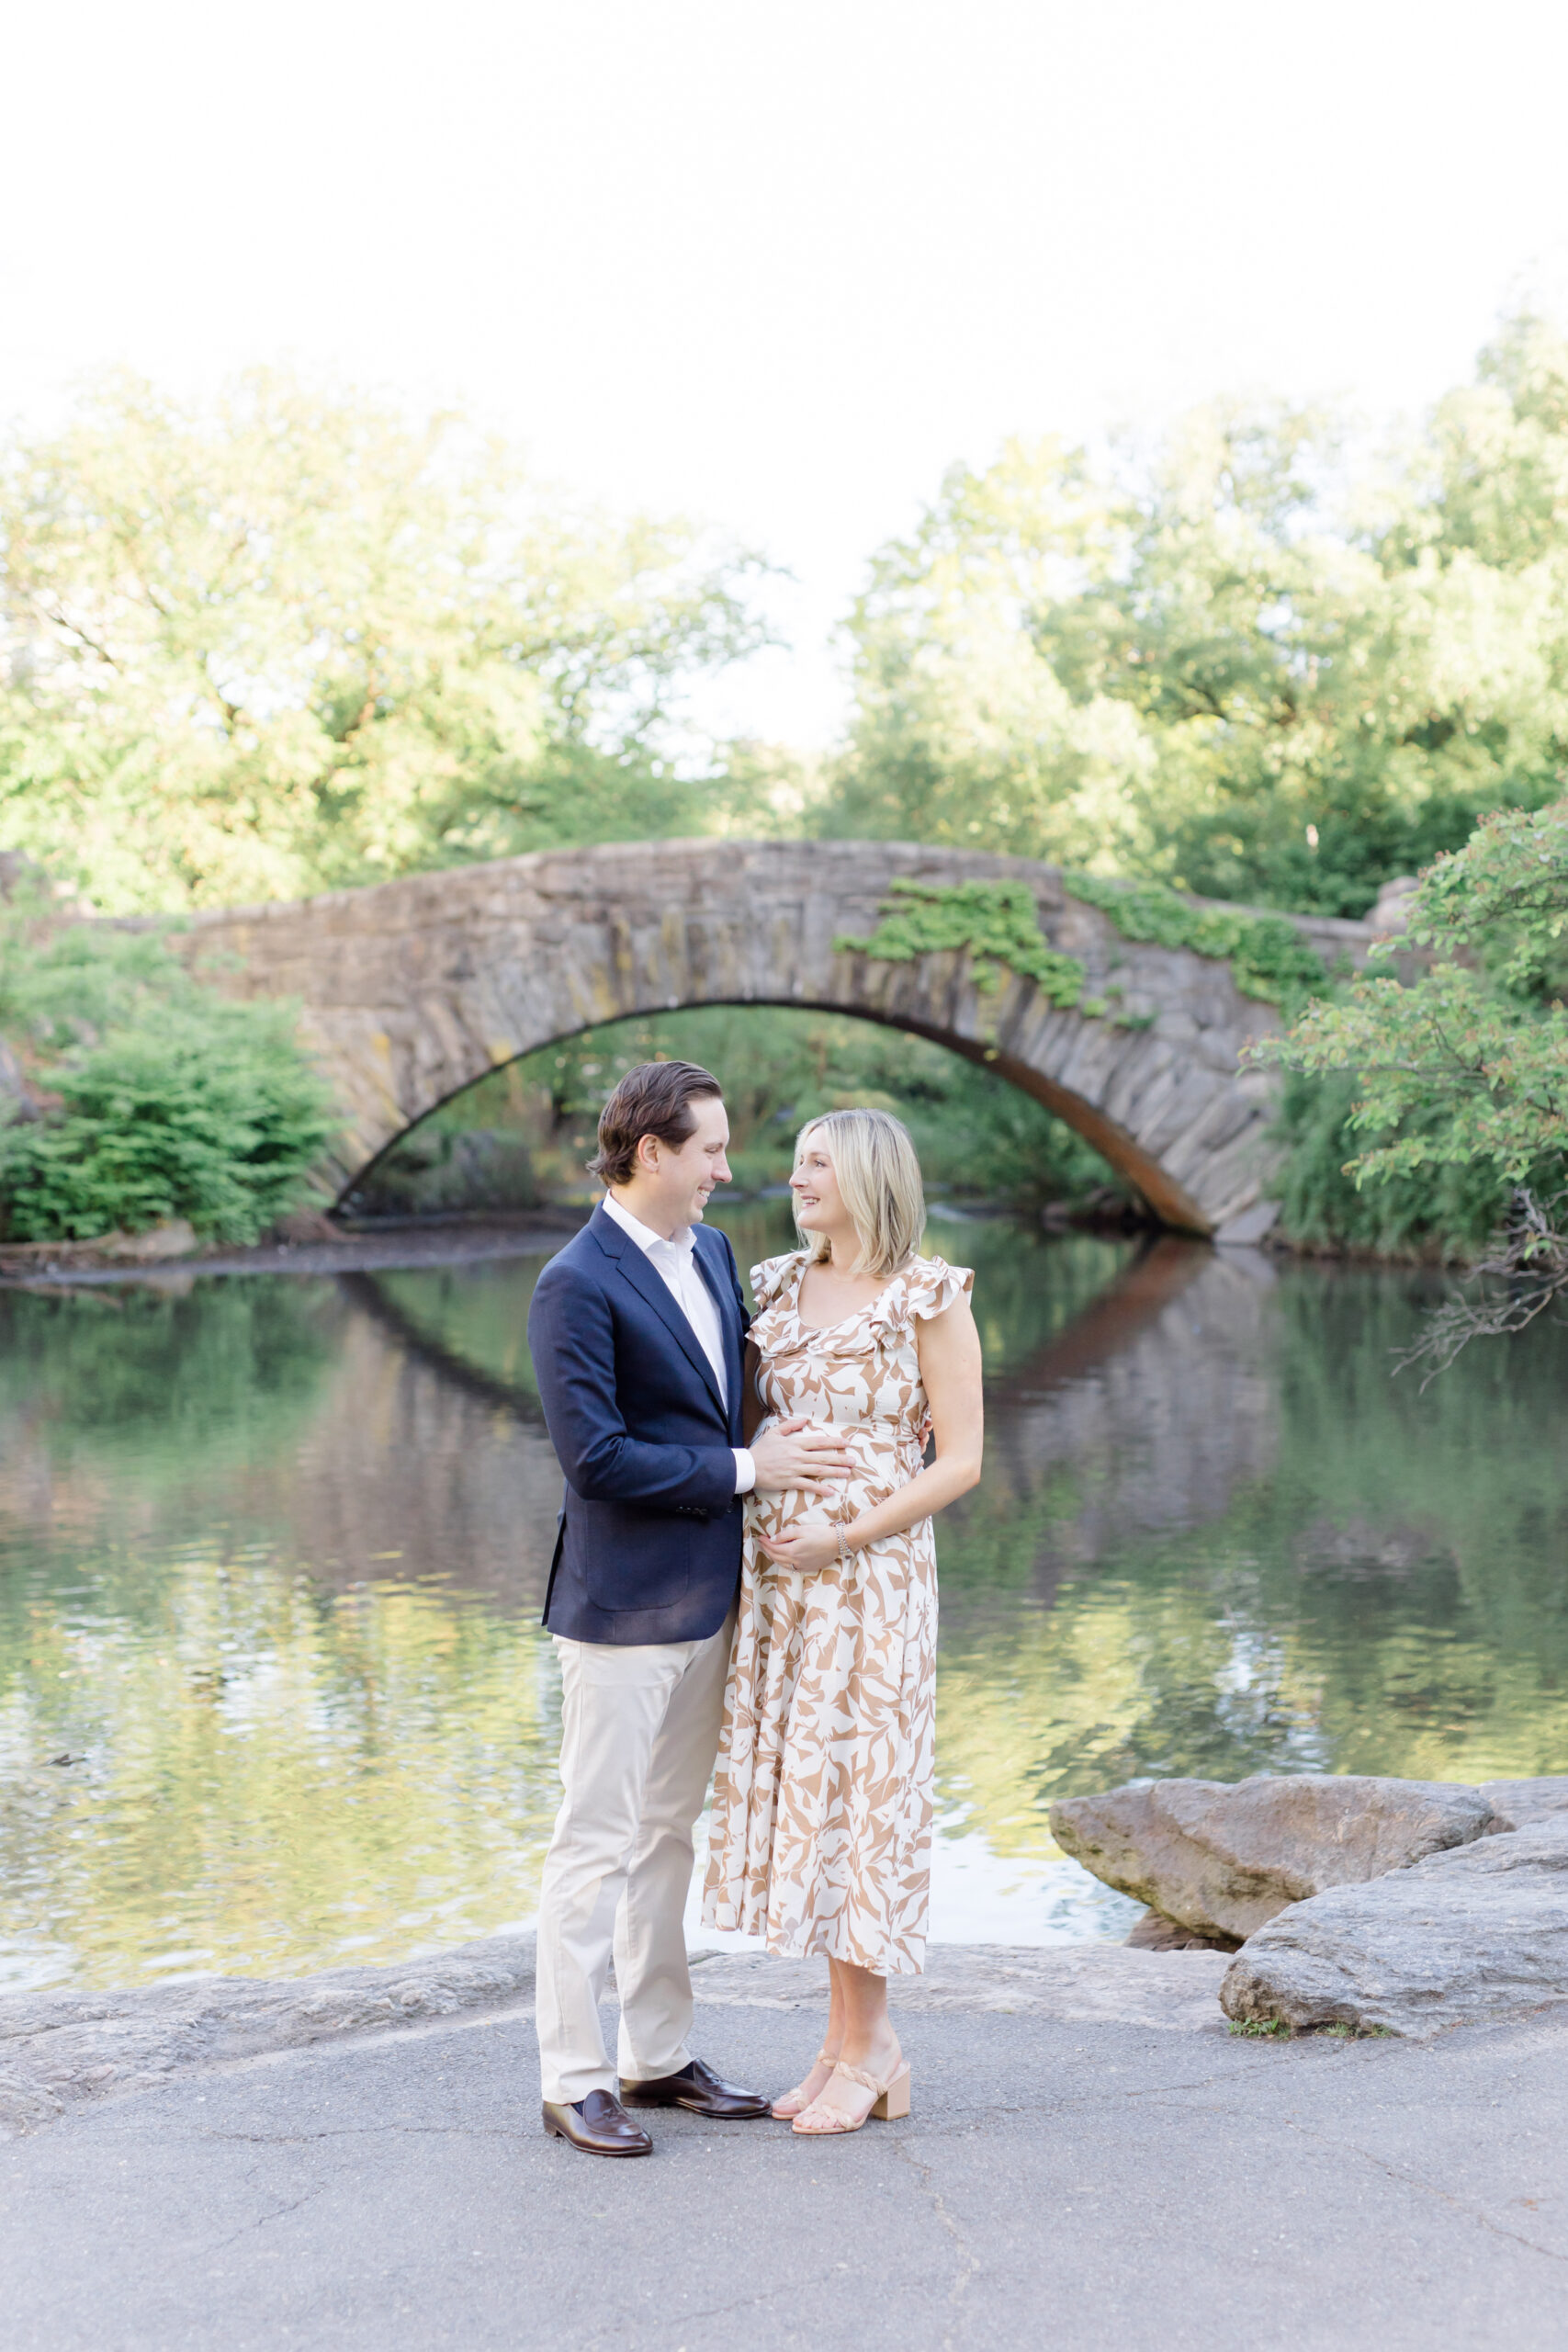 A pregnant woman and her husband smile at each other at a maternity photo session in Central Park shot by Jacqueline Clair Photography